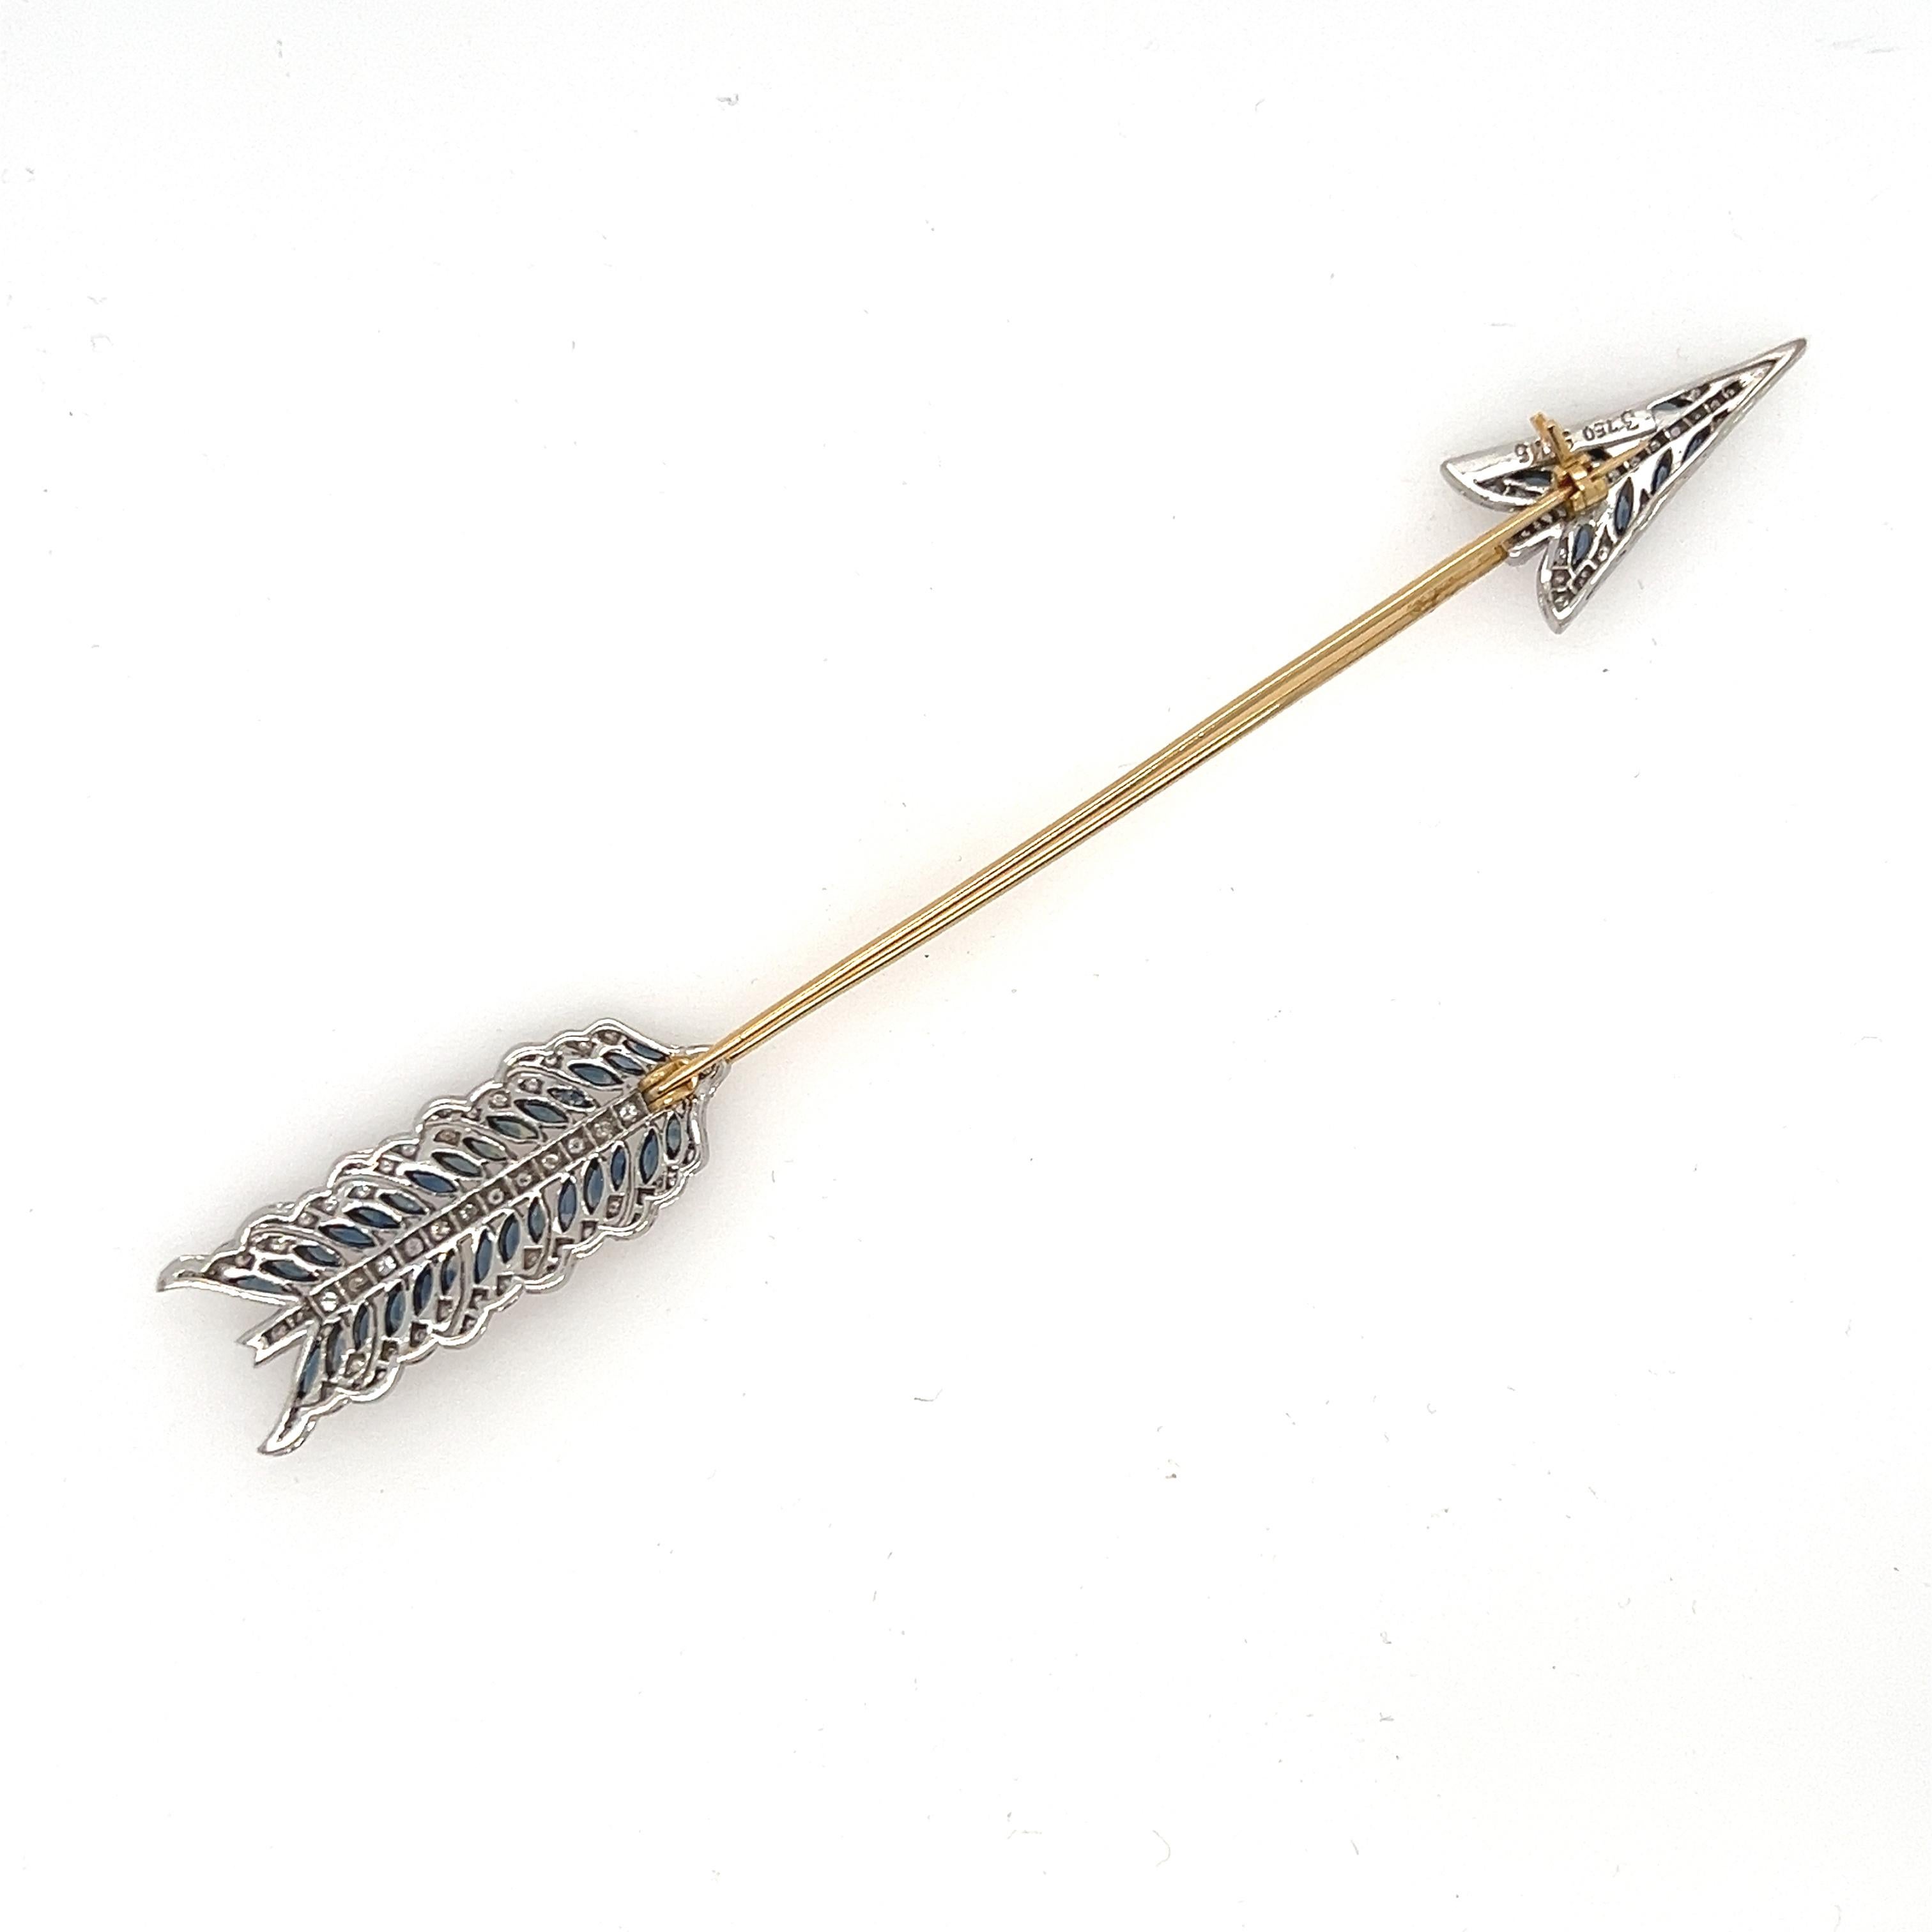 Oh I LOVE this special find so much - it's really going to be a hard one to let go! Crafted in 18K Yellow and White Gold, the design features a great Arrow Jabot Pin, highly detailed with Pave Set Diamonds, gorgeous Sapphires, and detailed